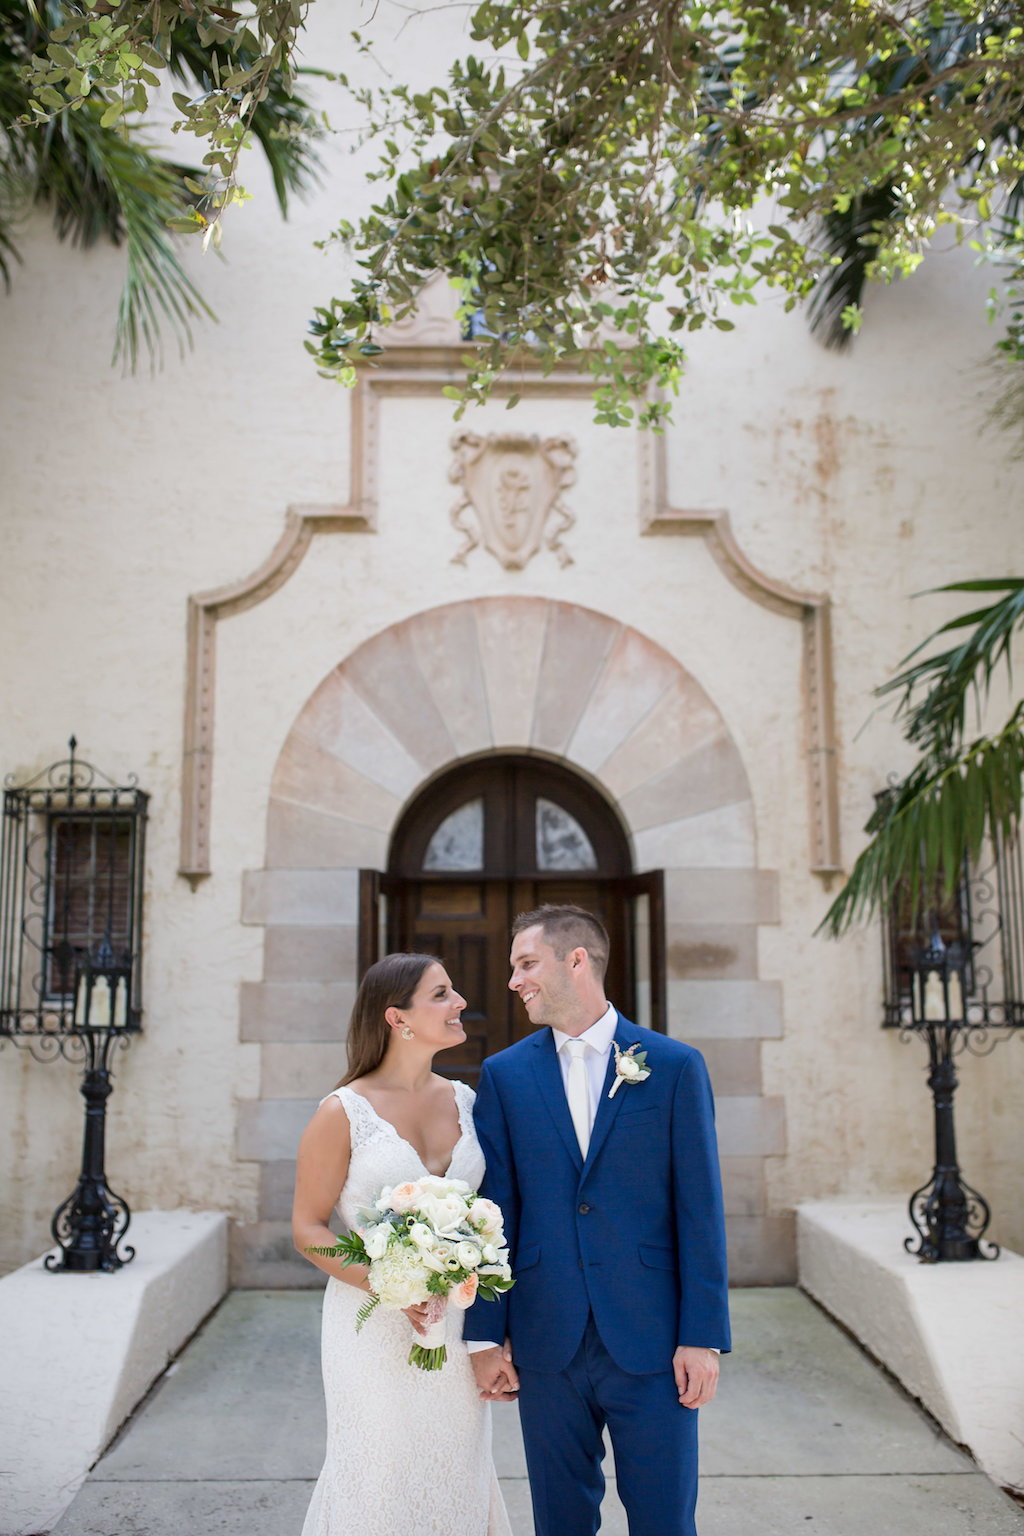 Outdoor Bride and Groom Wedding Portrait, Bride in Lace Tank Top Strap Plunging V Neckline Wedding Dress with White and Blush Pink Floral Bouquet, Groom in Blue Suit with White Tie and White Flower Bouttonniere | Tampa Bay Photographer Cat Pennenga Photography | Sarasota Venue Powel Crosley Estate